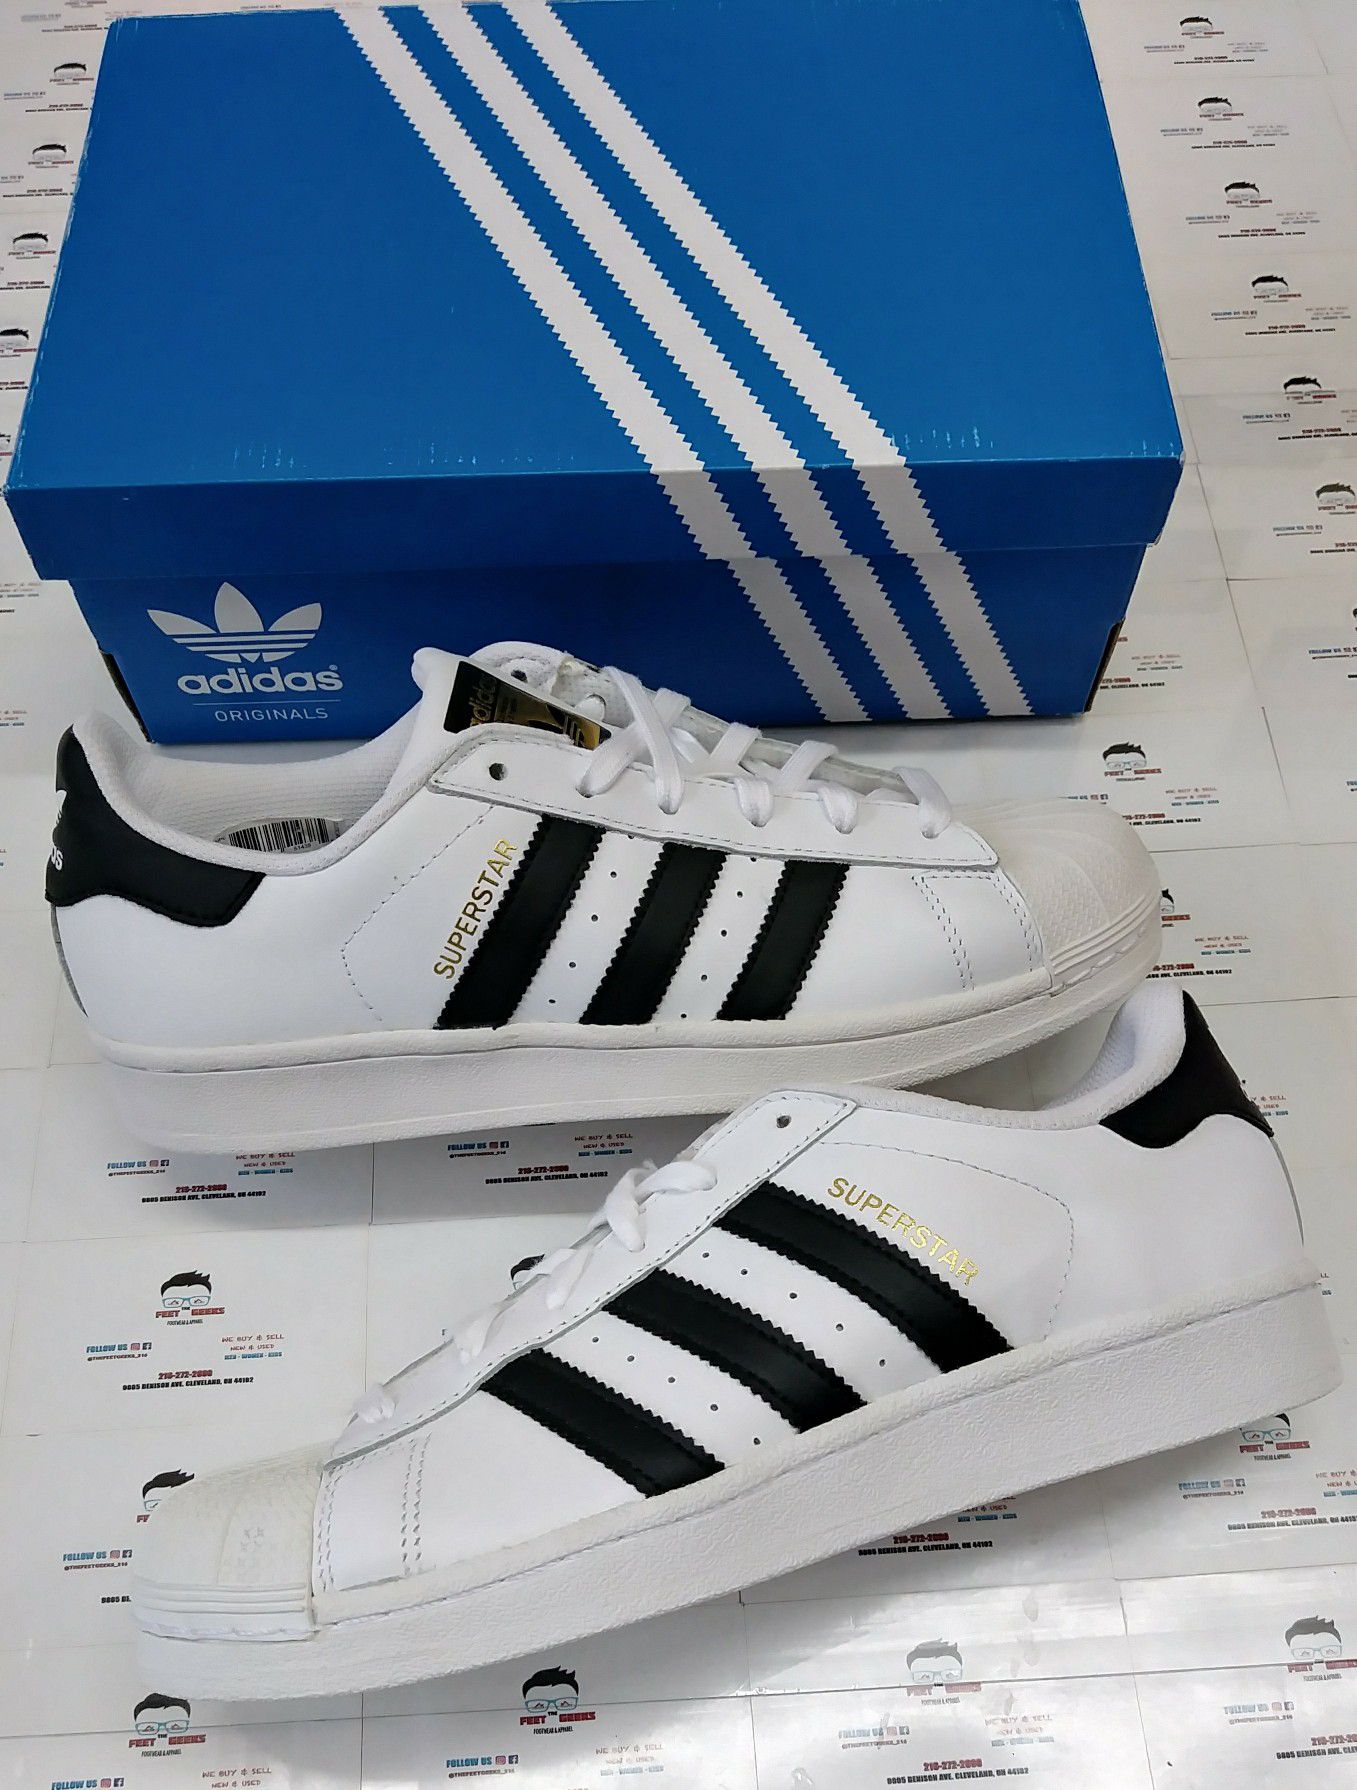 WOMENS ADIDAS ORIGINALS SUPERSTAR SHELLTOES SIZES 8,9.5 ALL BRAND NEW WITH BOX $60